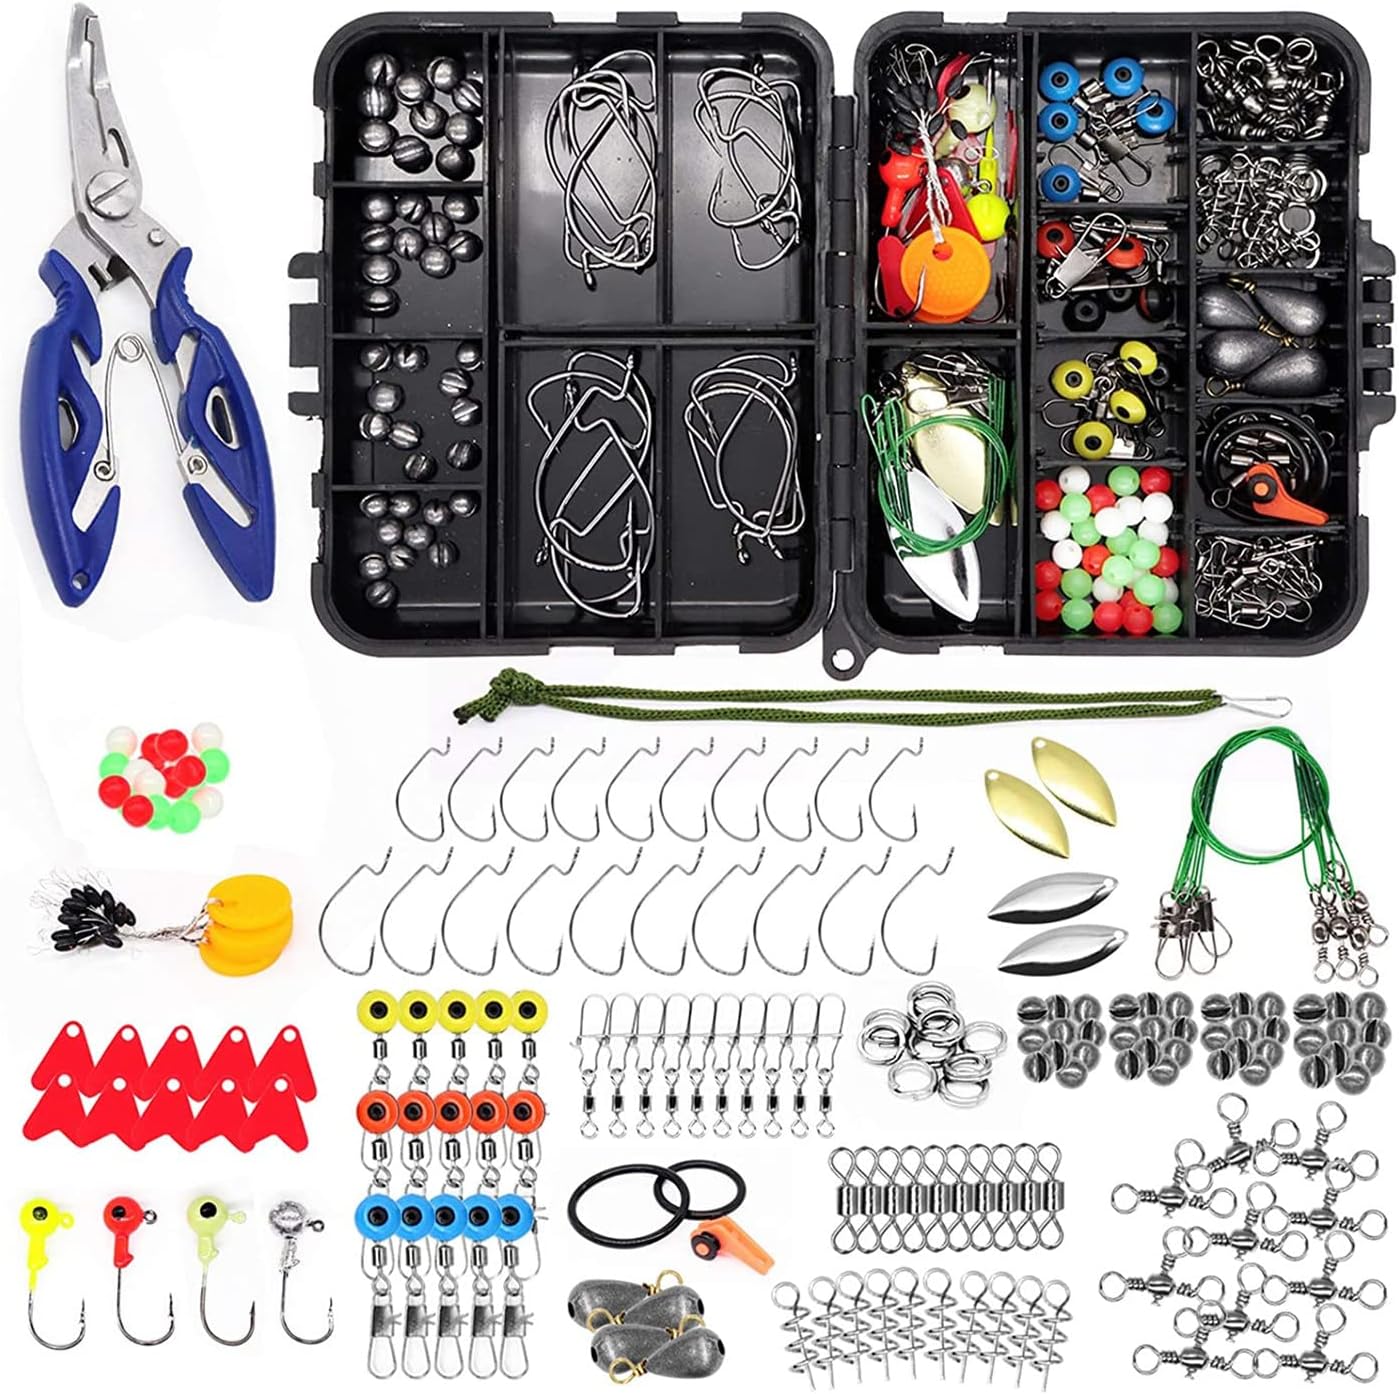 Fishing Accessories Kit【188PCS】 Set with Tackle Box, Including